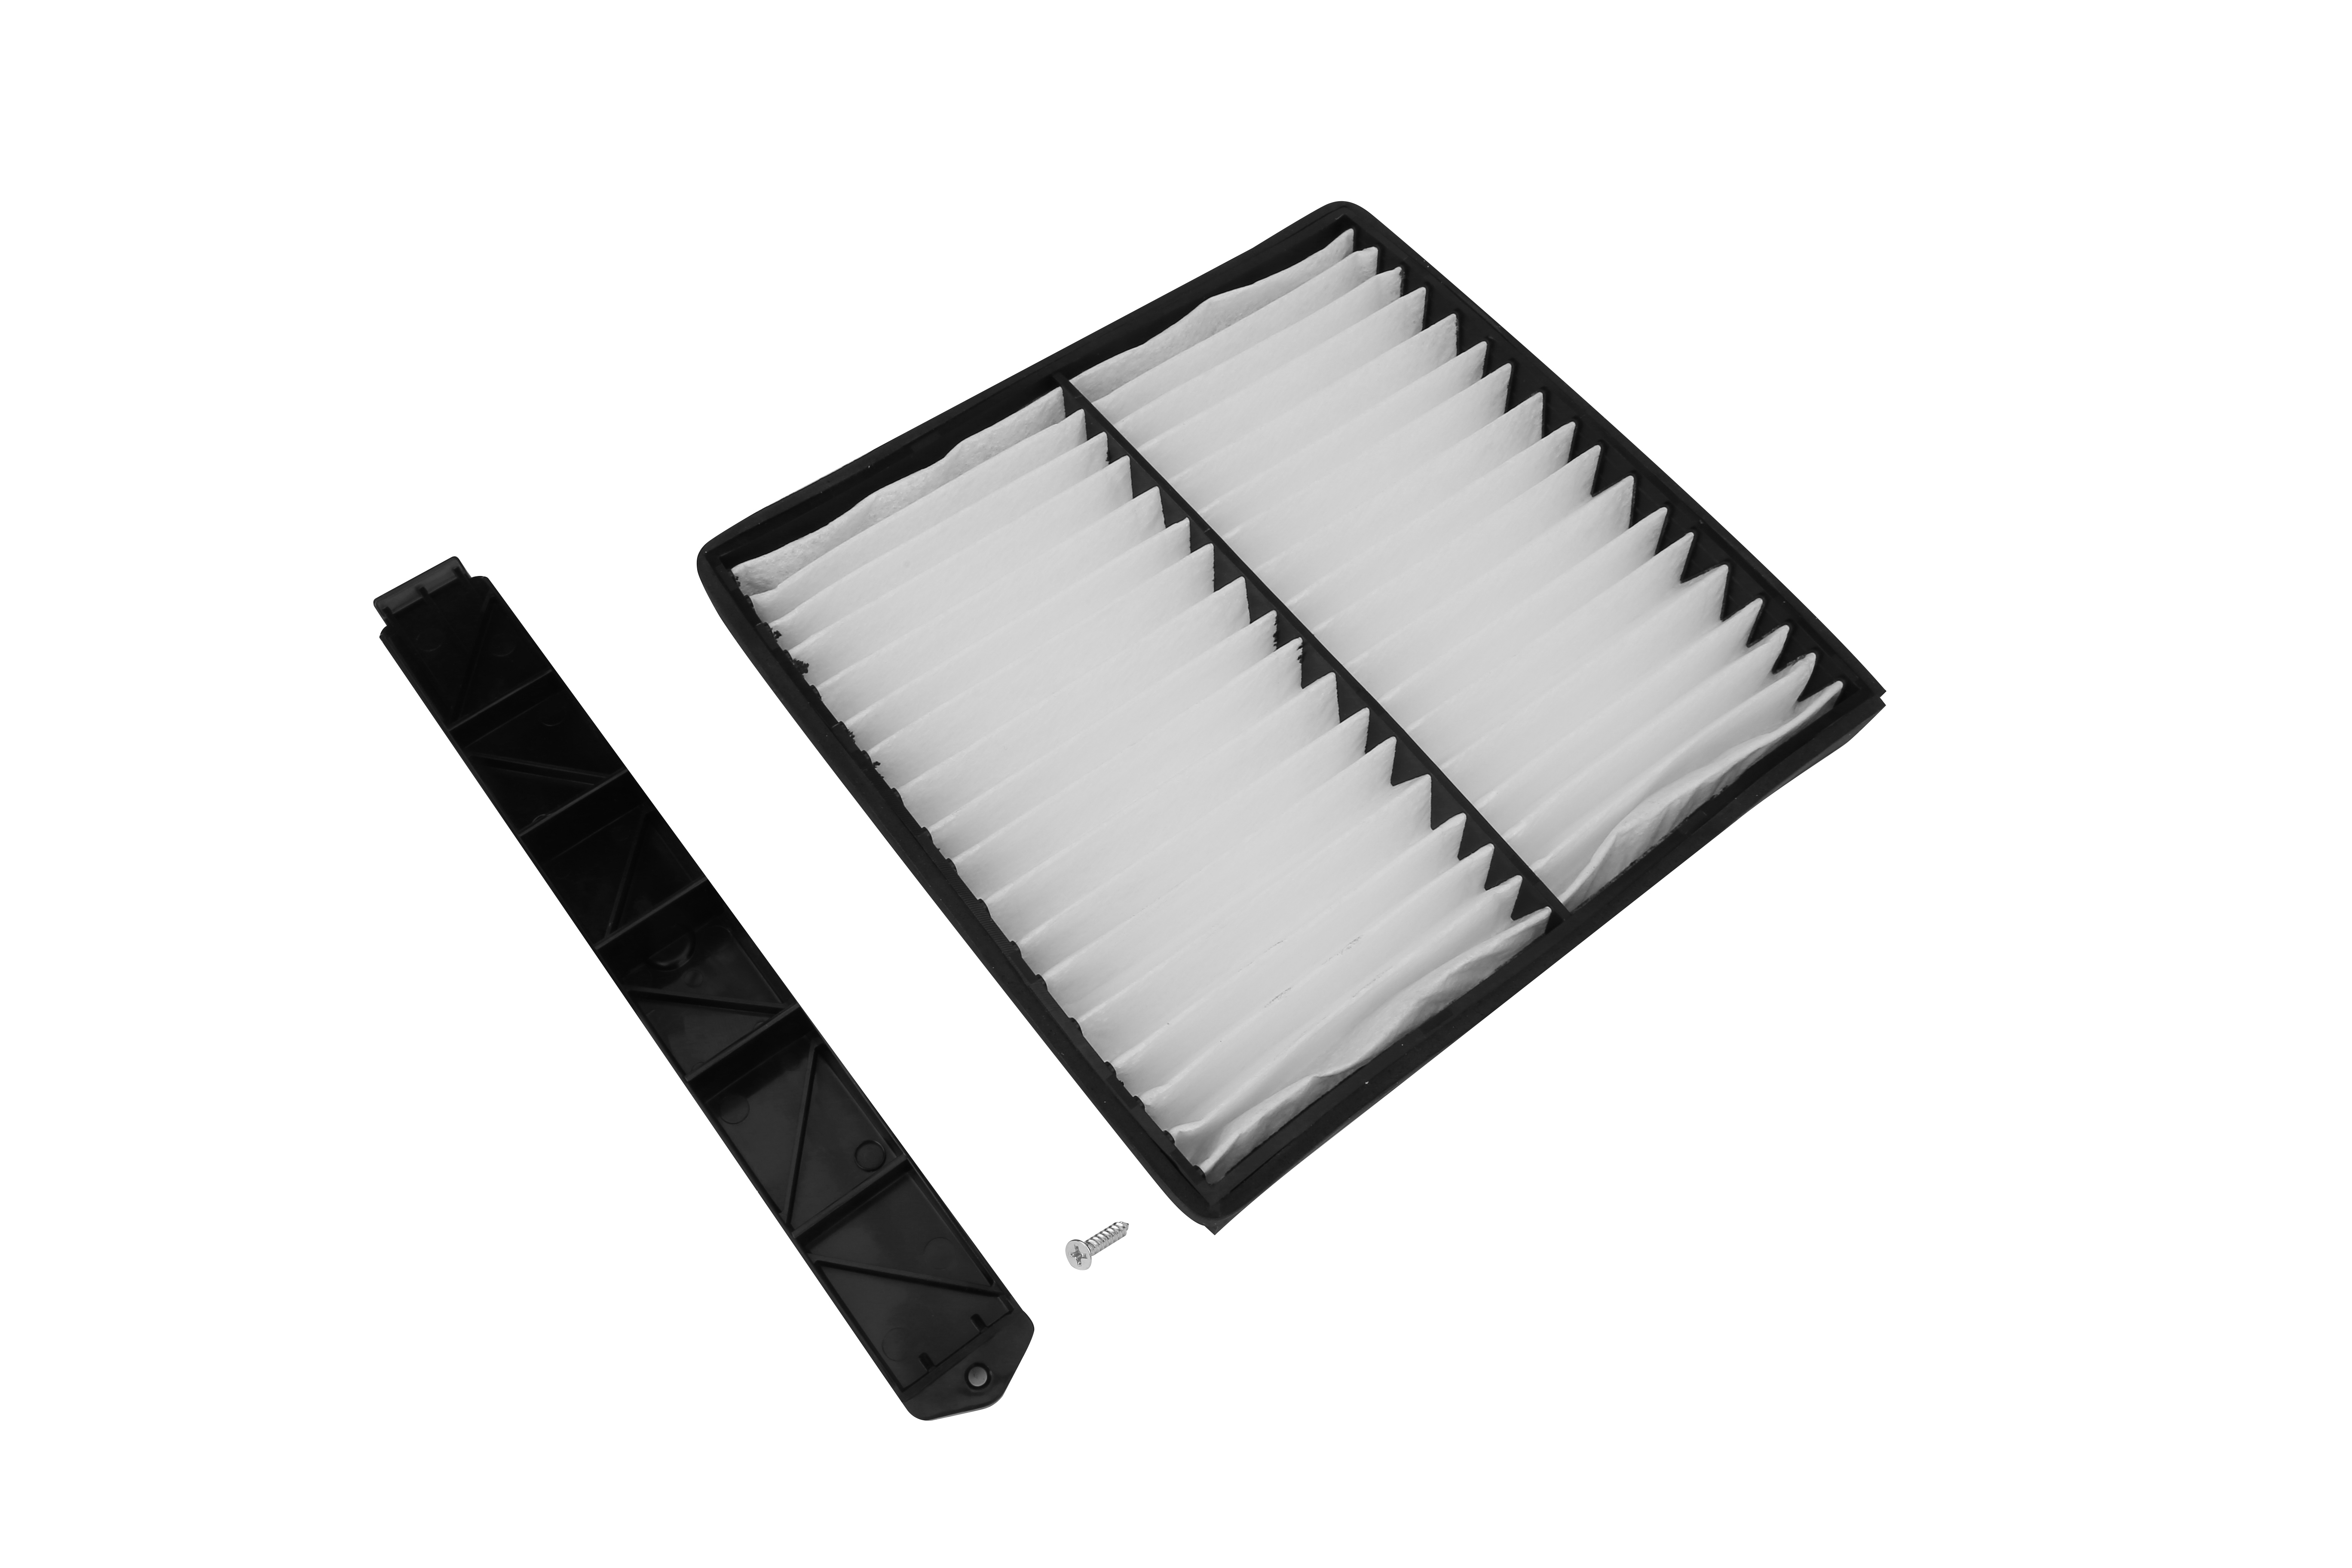 Cabin Air Filter Retrofit Kit - Replaces 259-200 for Chevy, Cadillac and GMC Vehicles Image